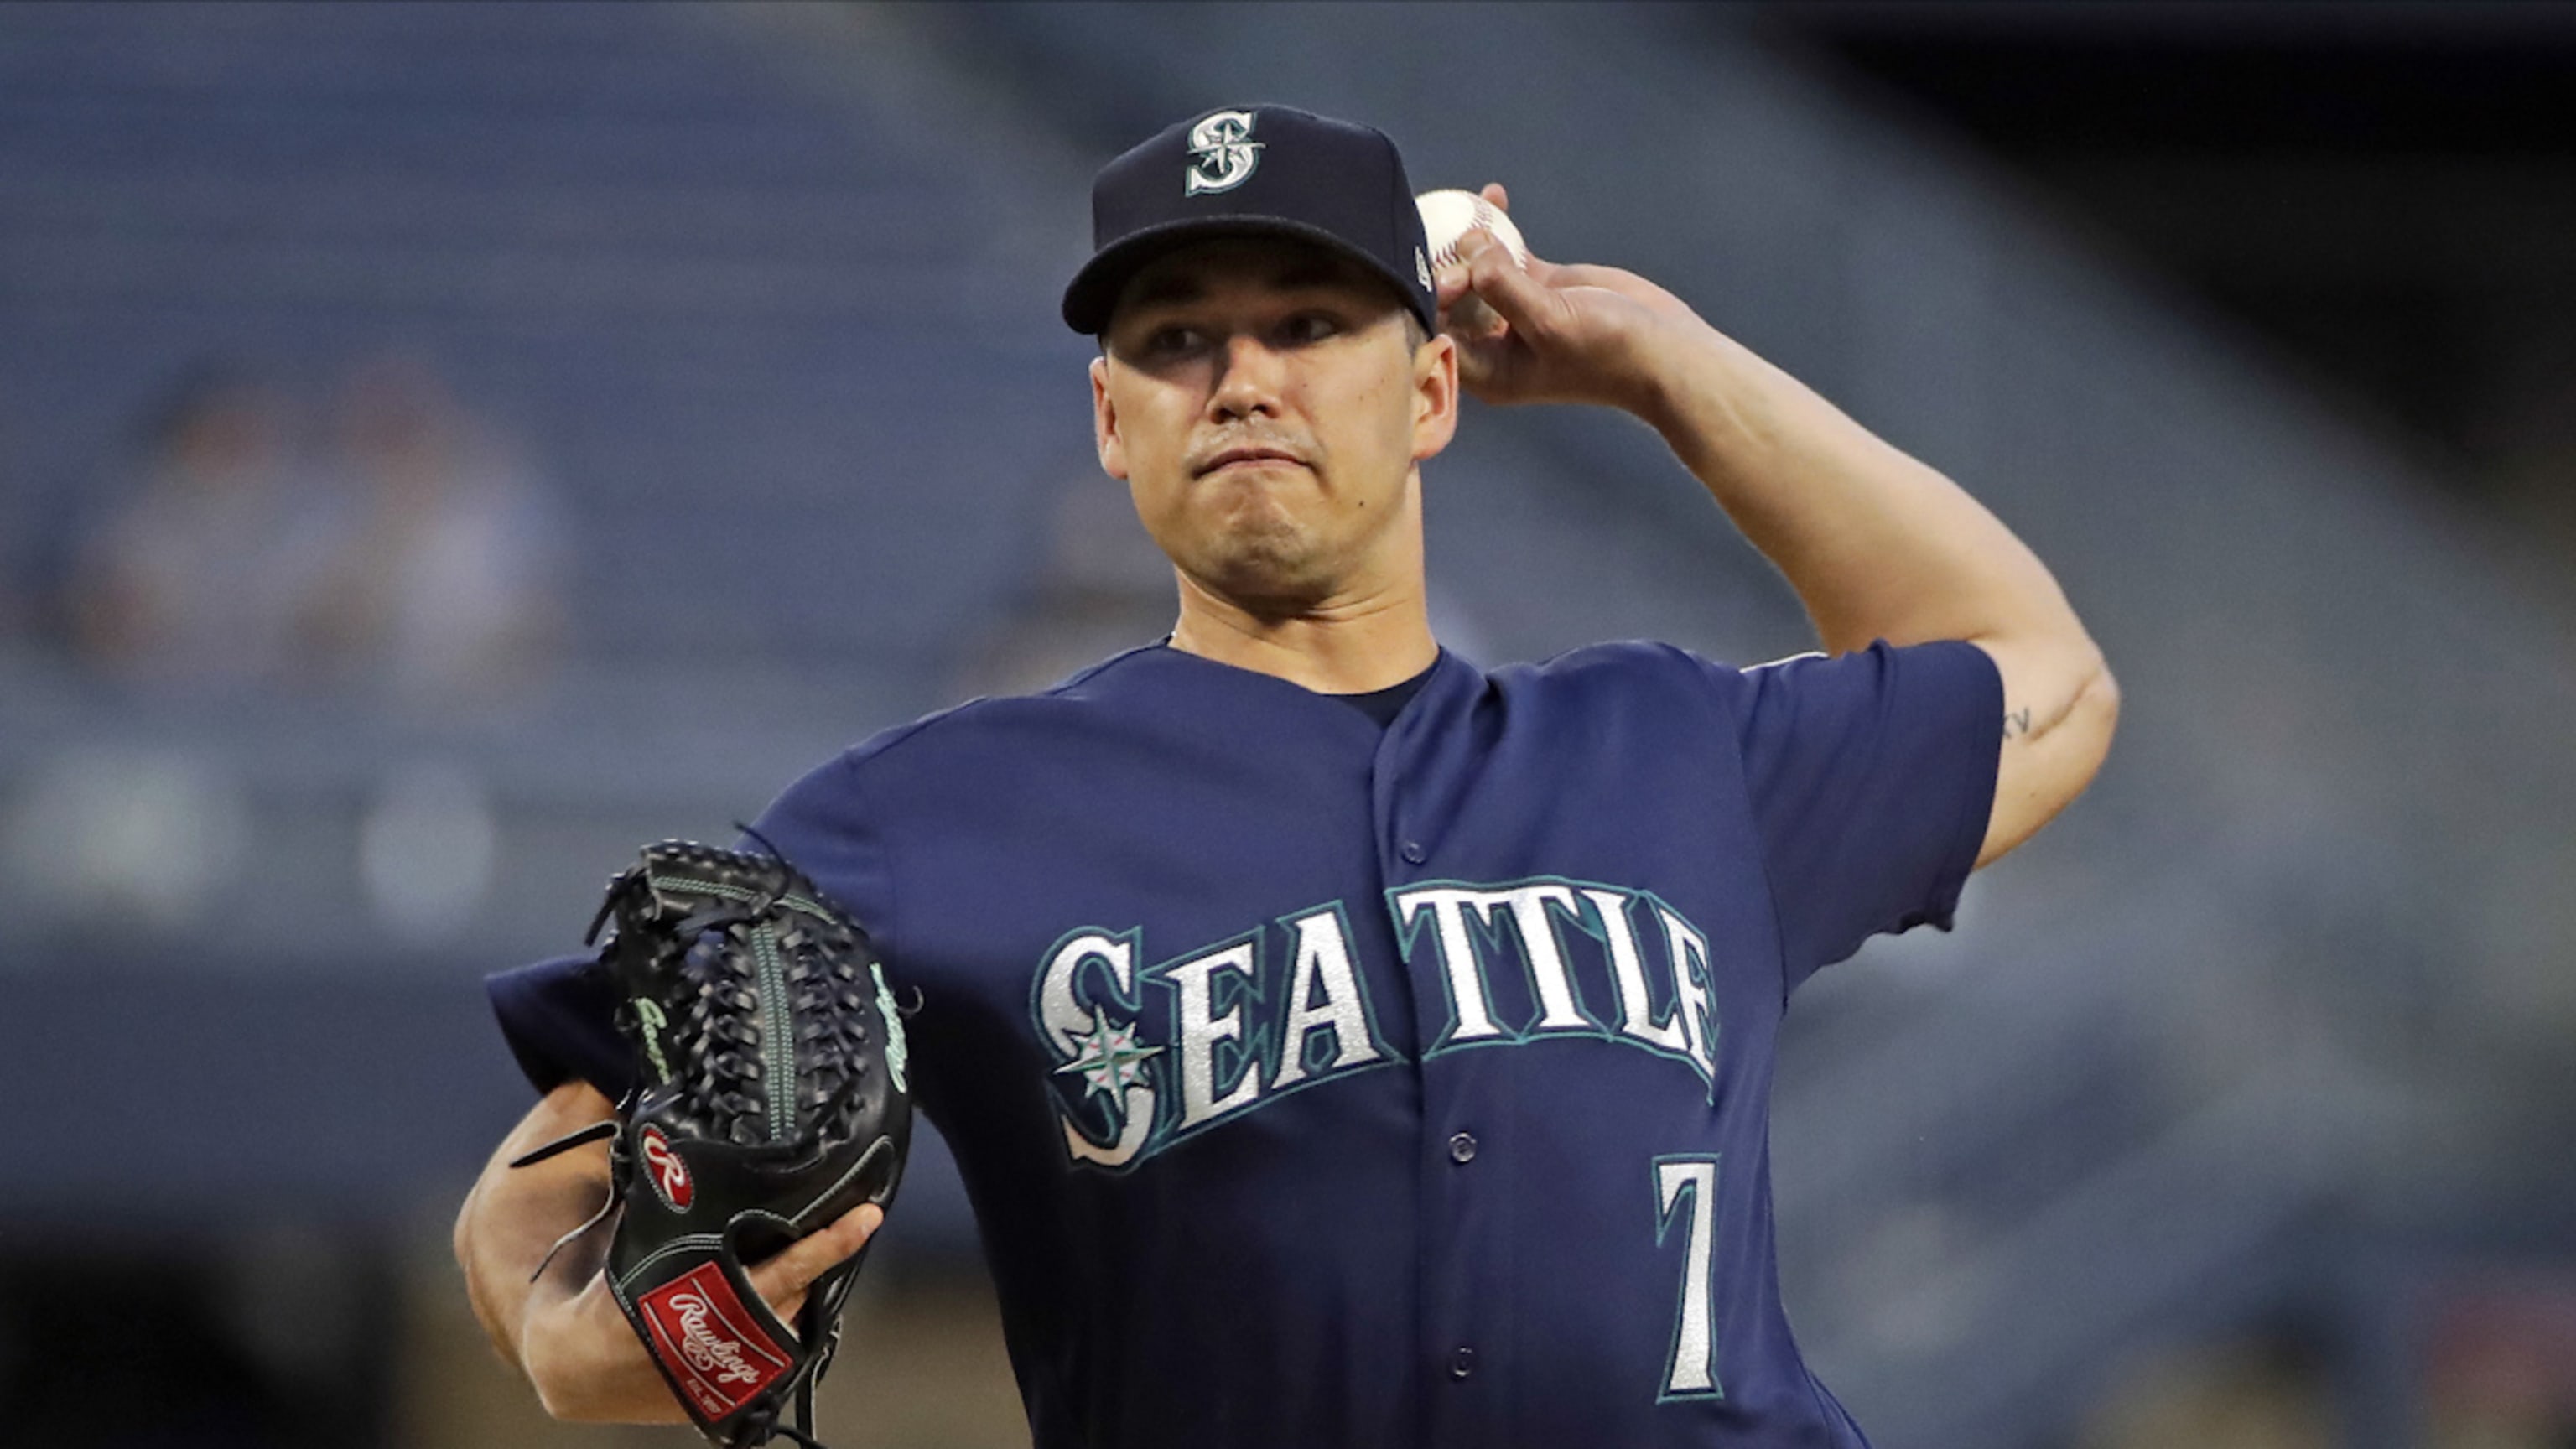 Seattle Mariners announce 4-year extension for Marco Gonzales